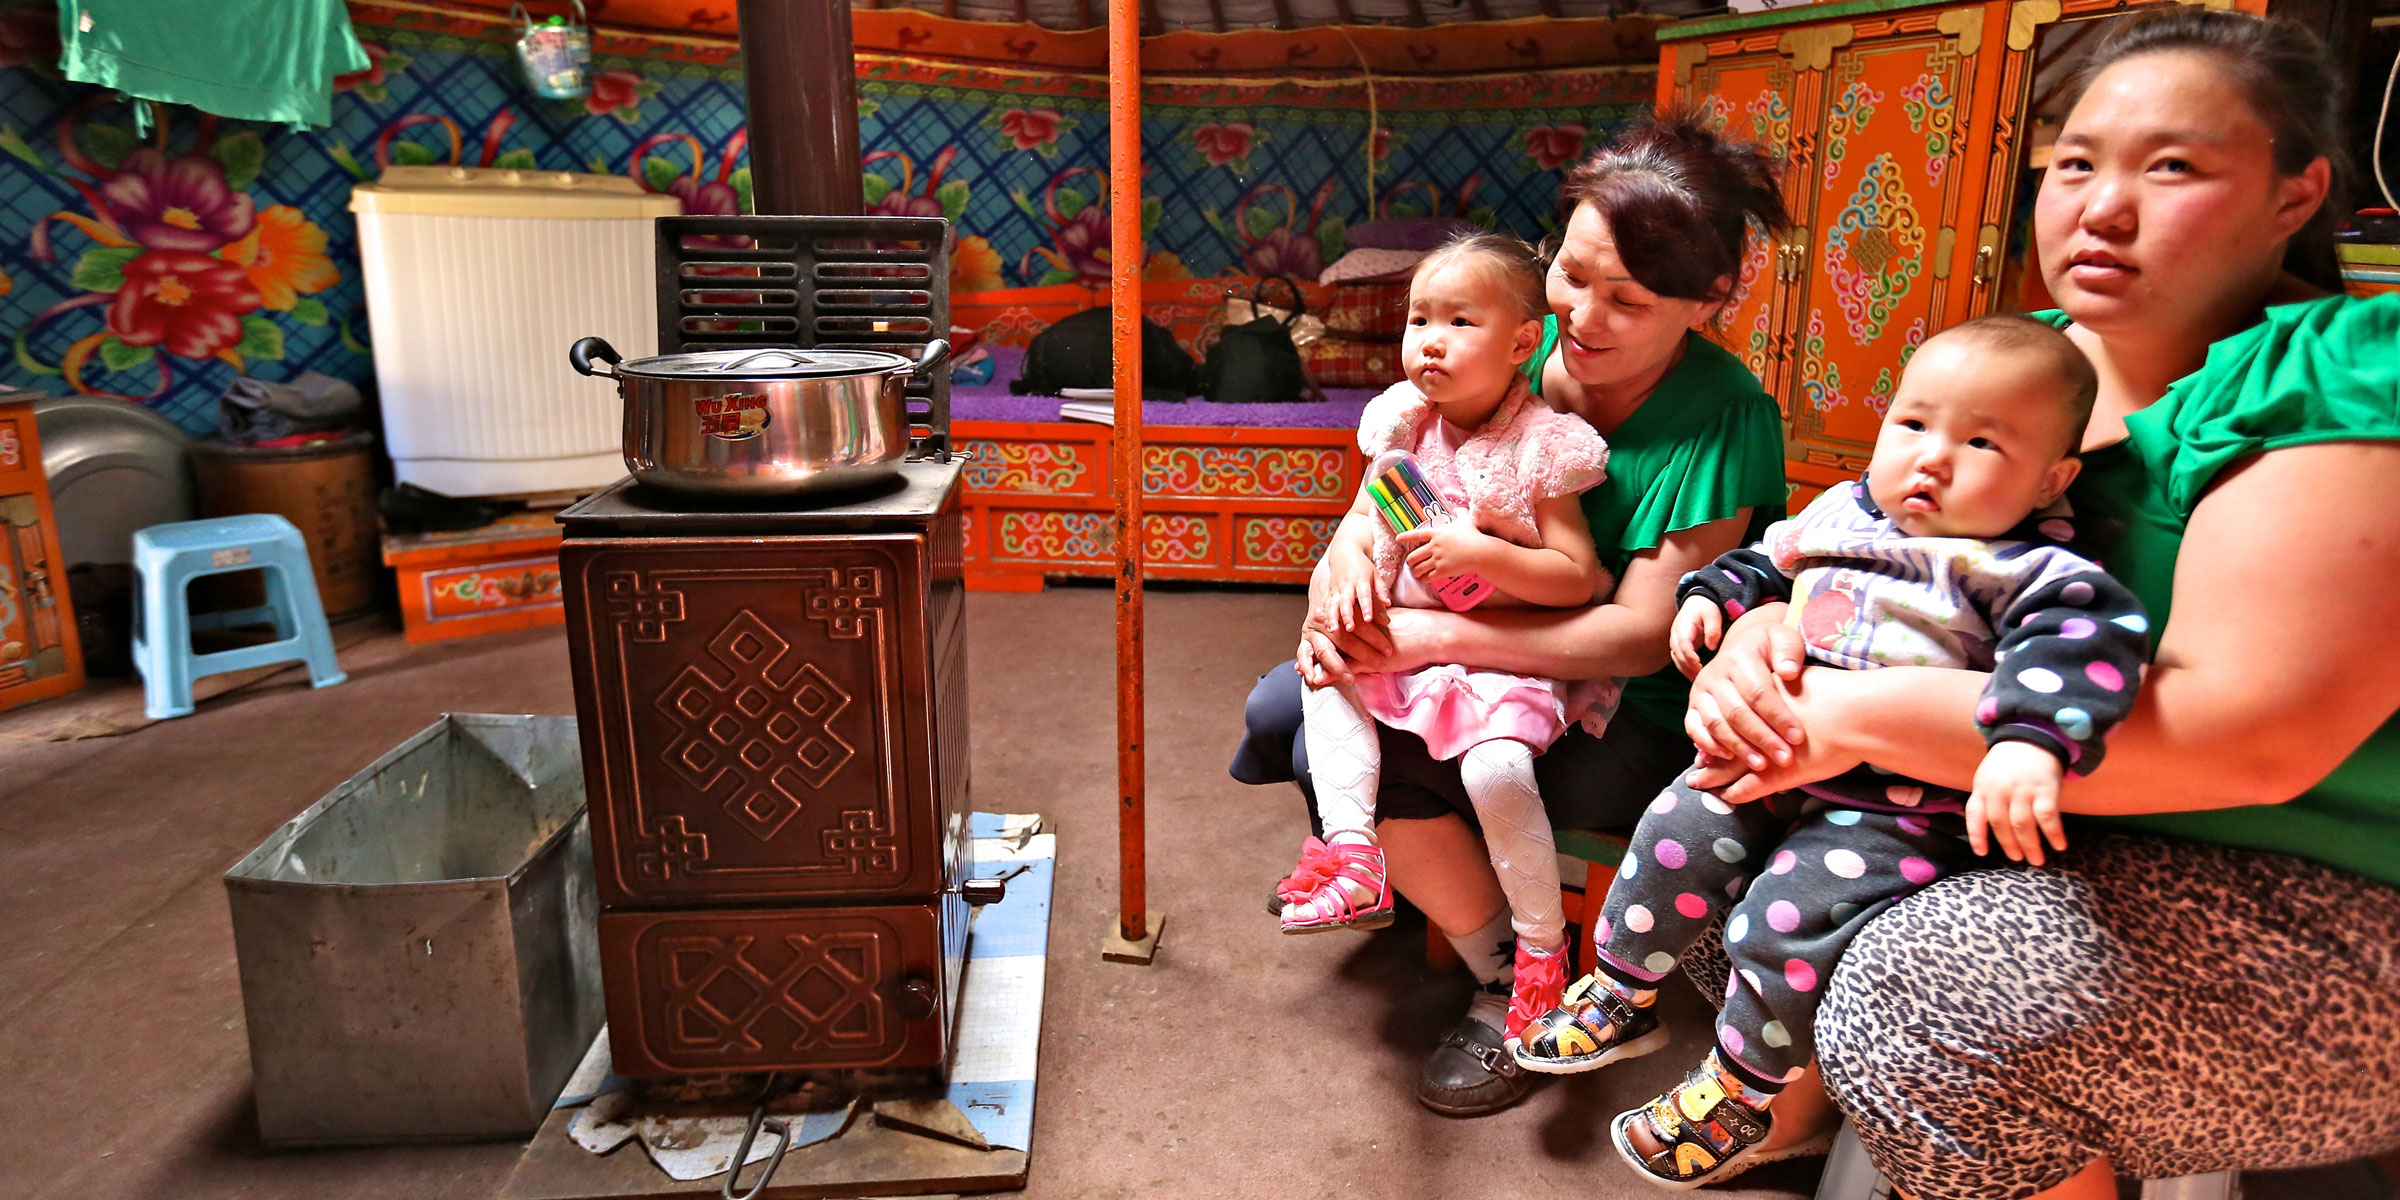 A household with an energy efficient stove purchased through the subsidy program.